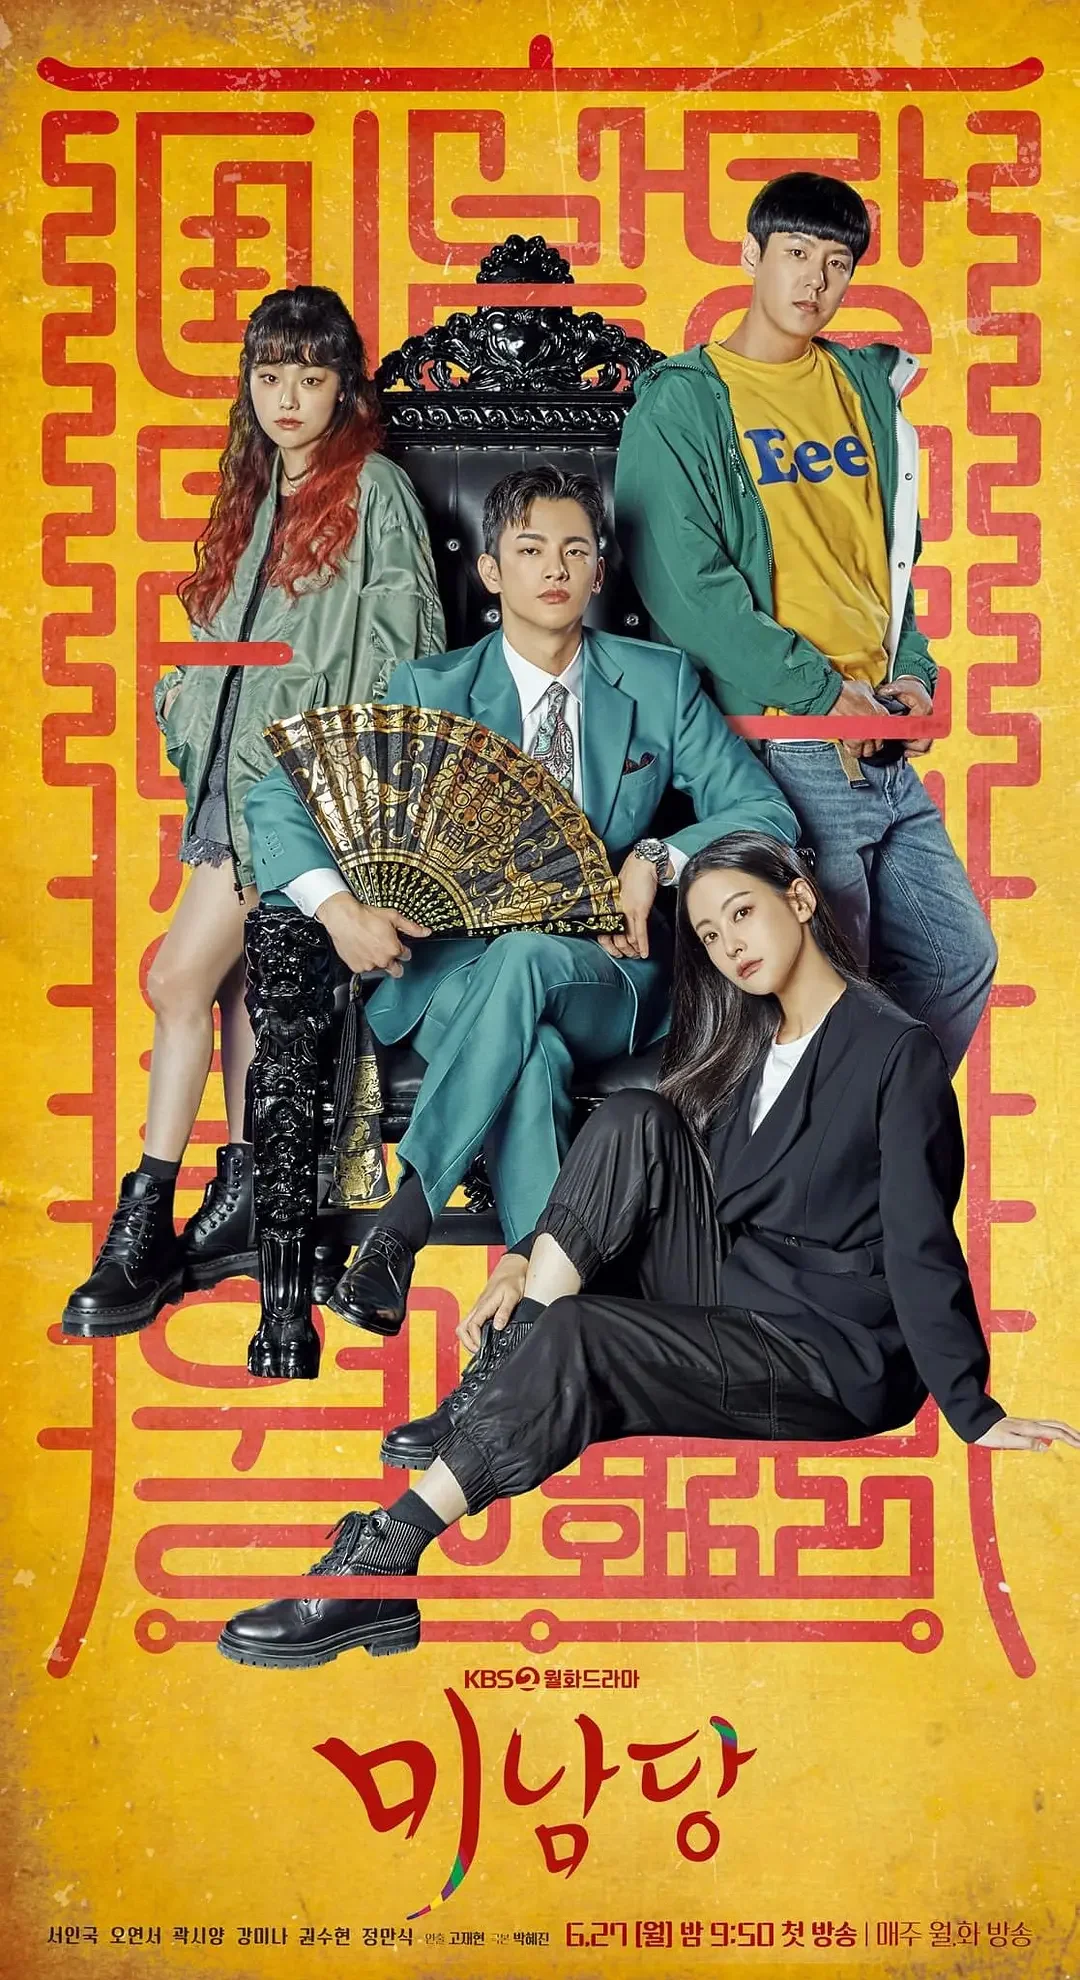 Korean drama "Café Minamdang" release Official Trailer,it will be online on 27 June, only on Netflix